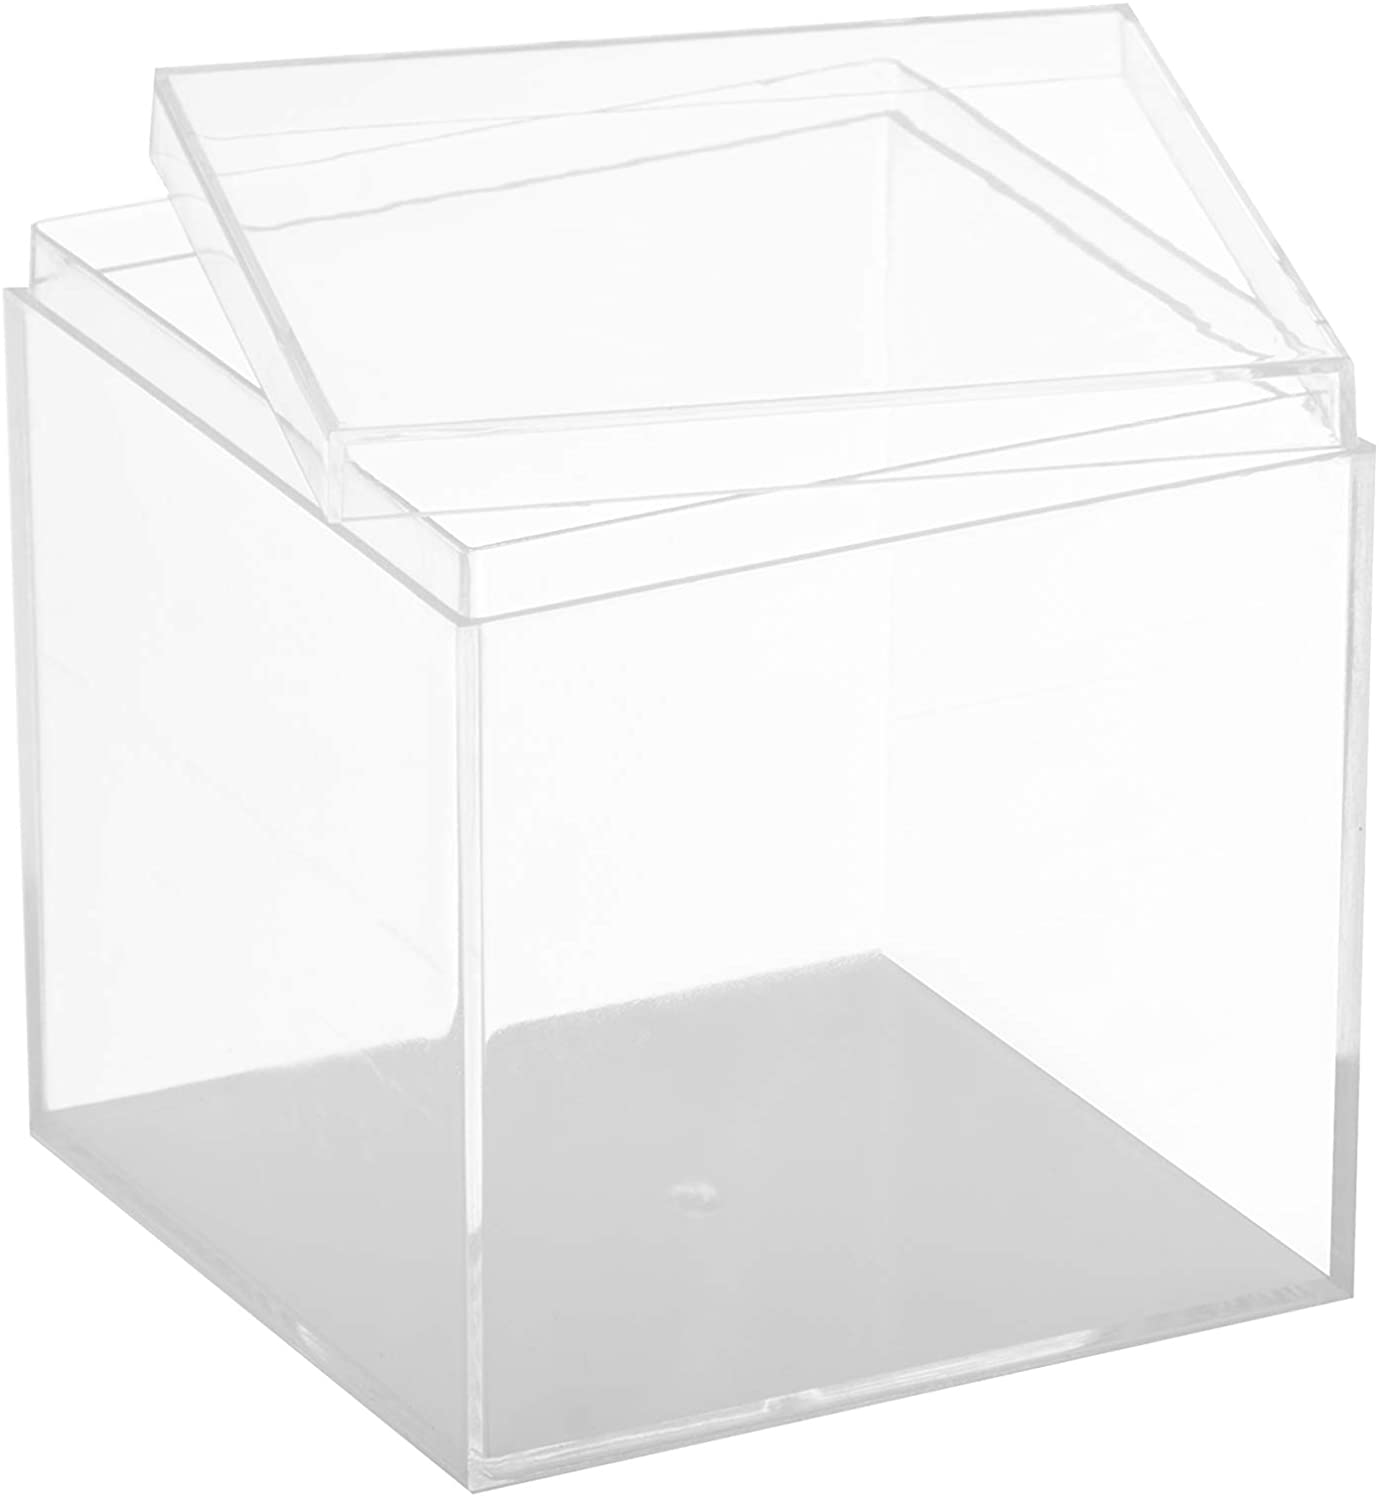 Wholesale Clear Acrylic Boxes, Wholesale Clear Acrylic Boxes